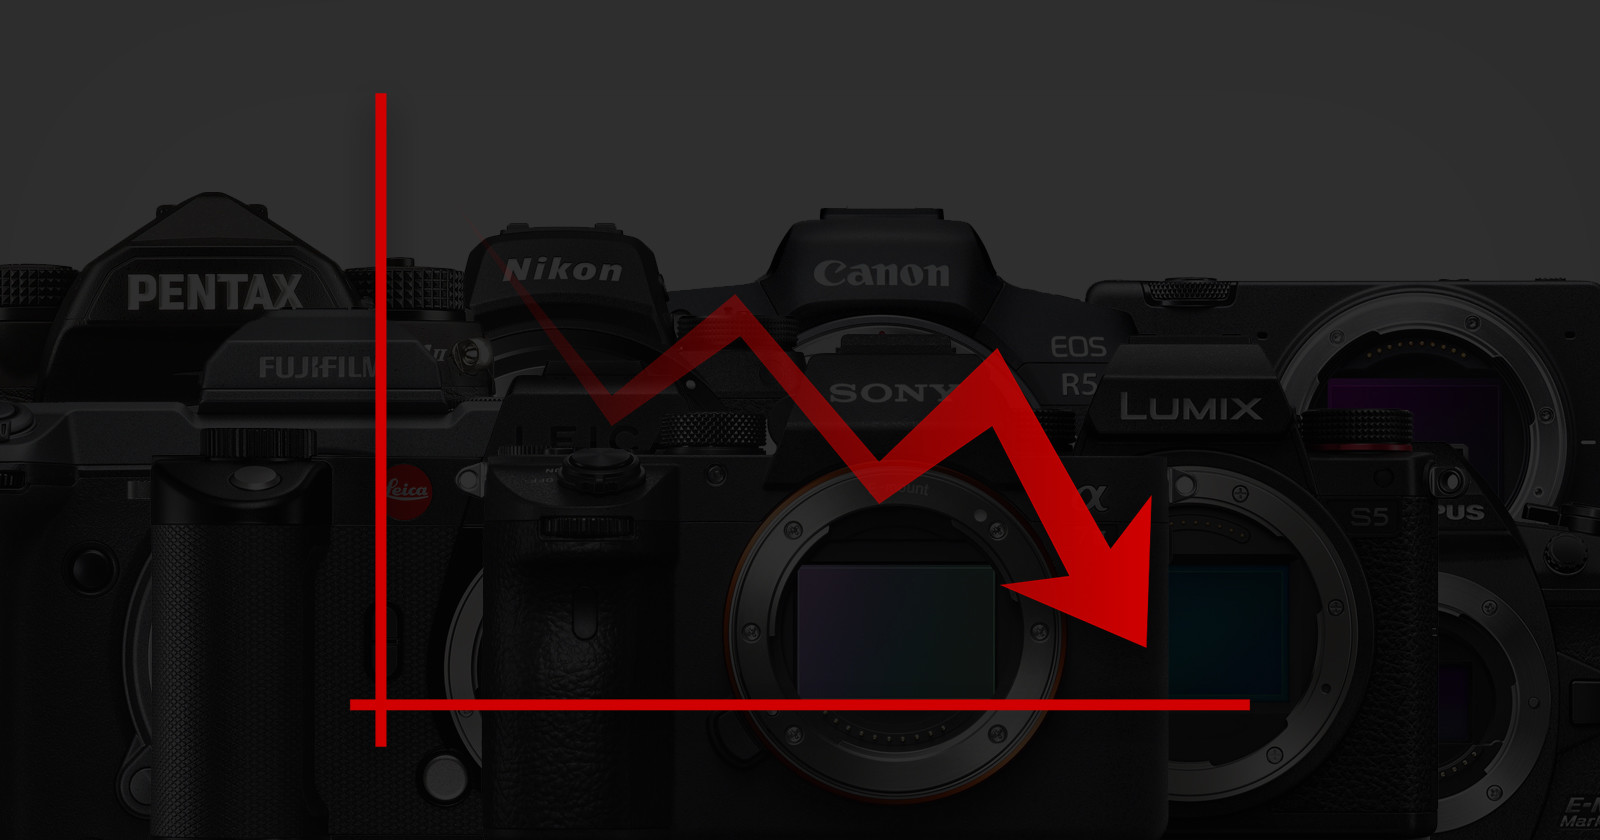  camera production down much over last years report 